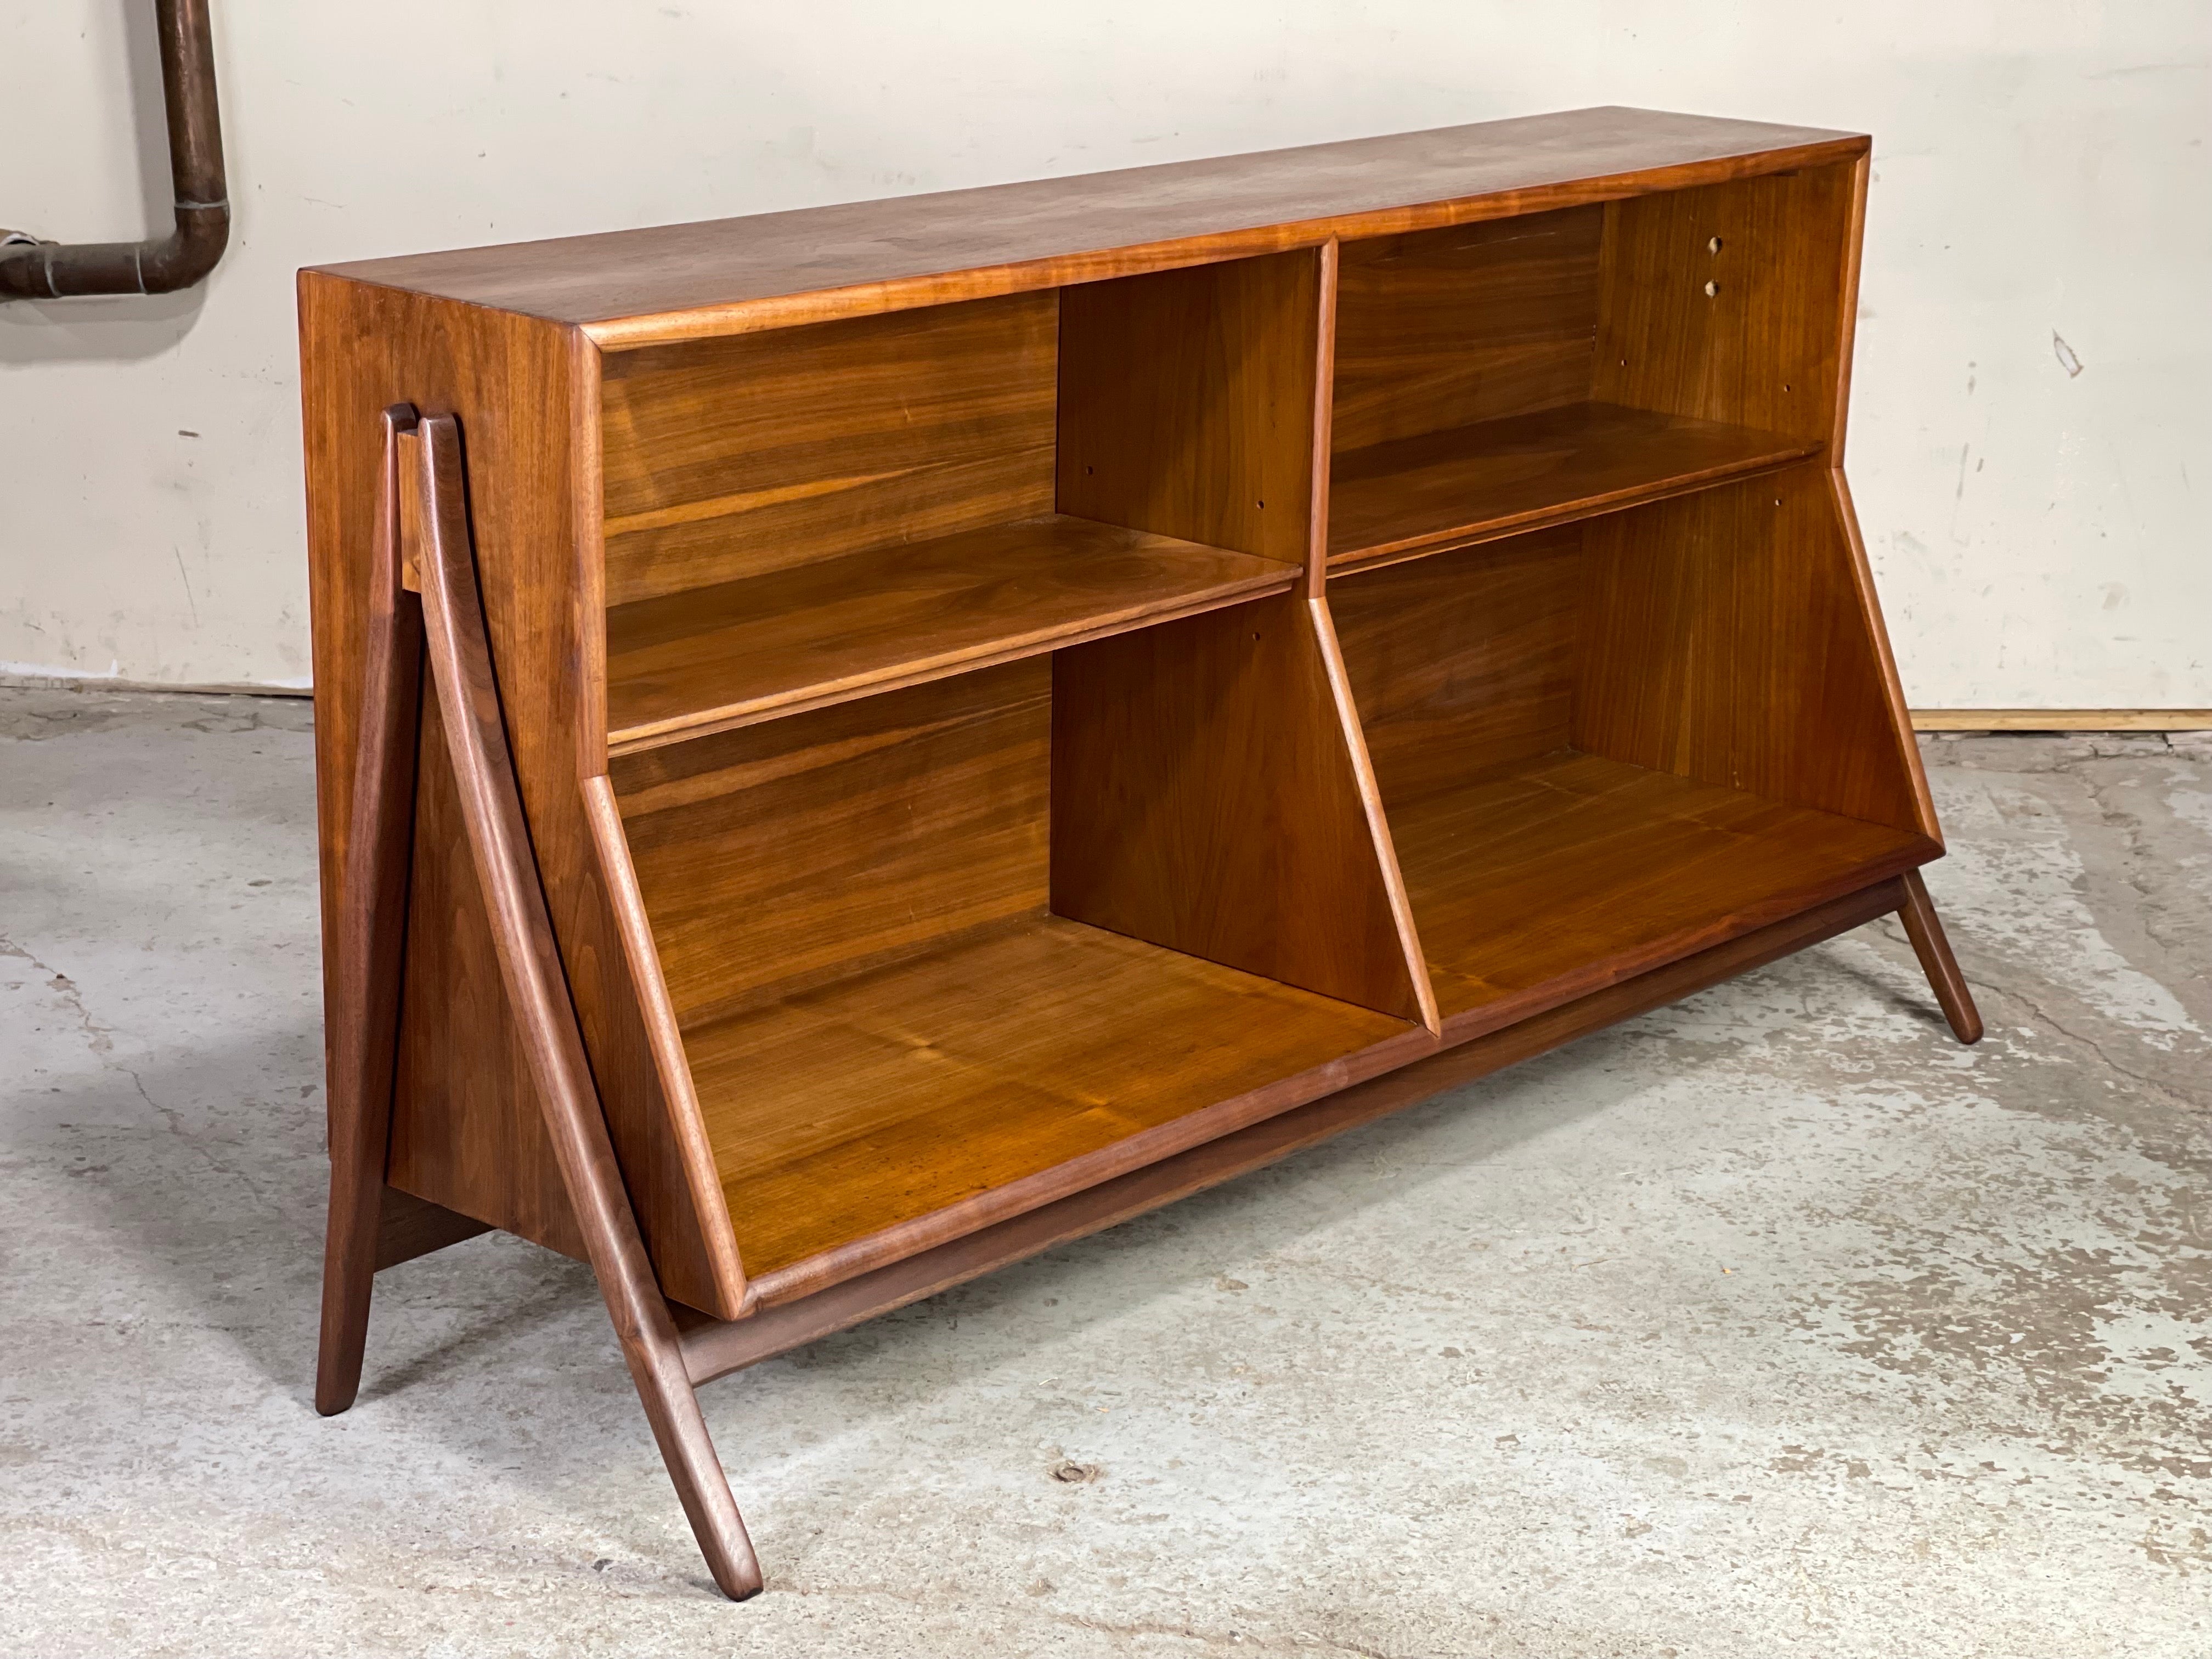 Mid century walnut bookcase by Kipp Stewart & Stewart MacDougall for Drexel; 1958. The classic mid century bookcase by Drexel Declaration featuring exoskeleton legs, adjustable shelves and sleek modernist lines. The walnut casing has been